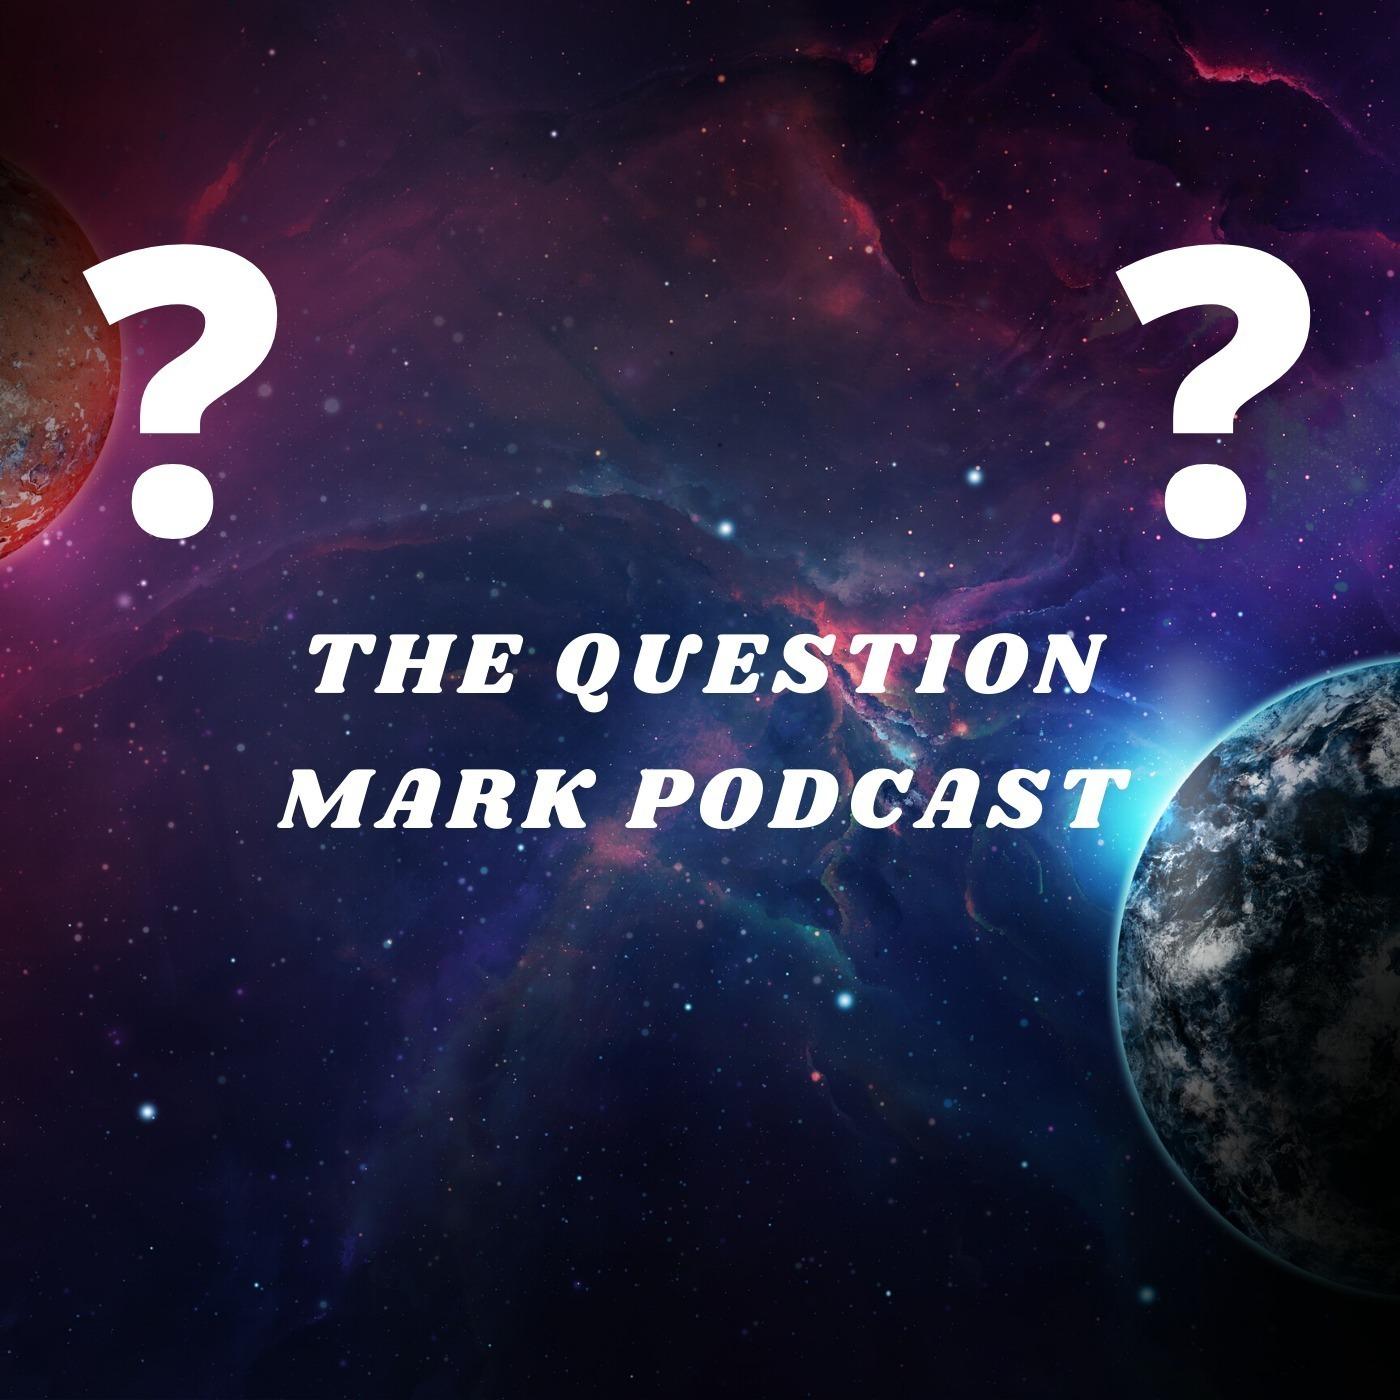 The Question Mark Podcast